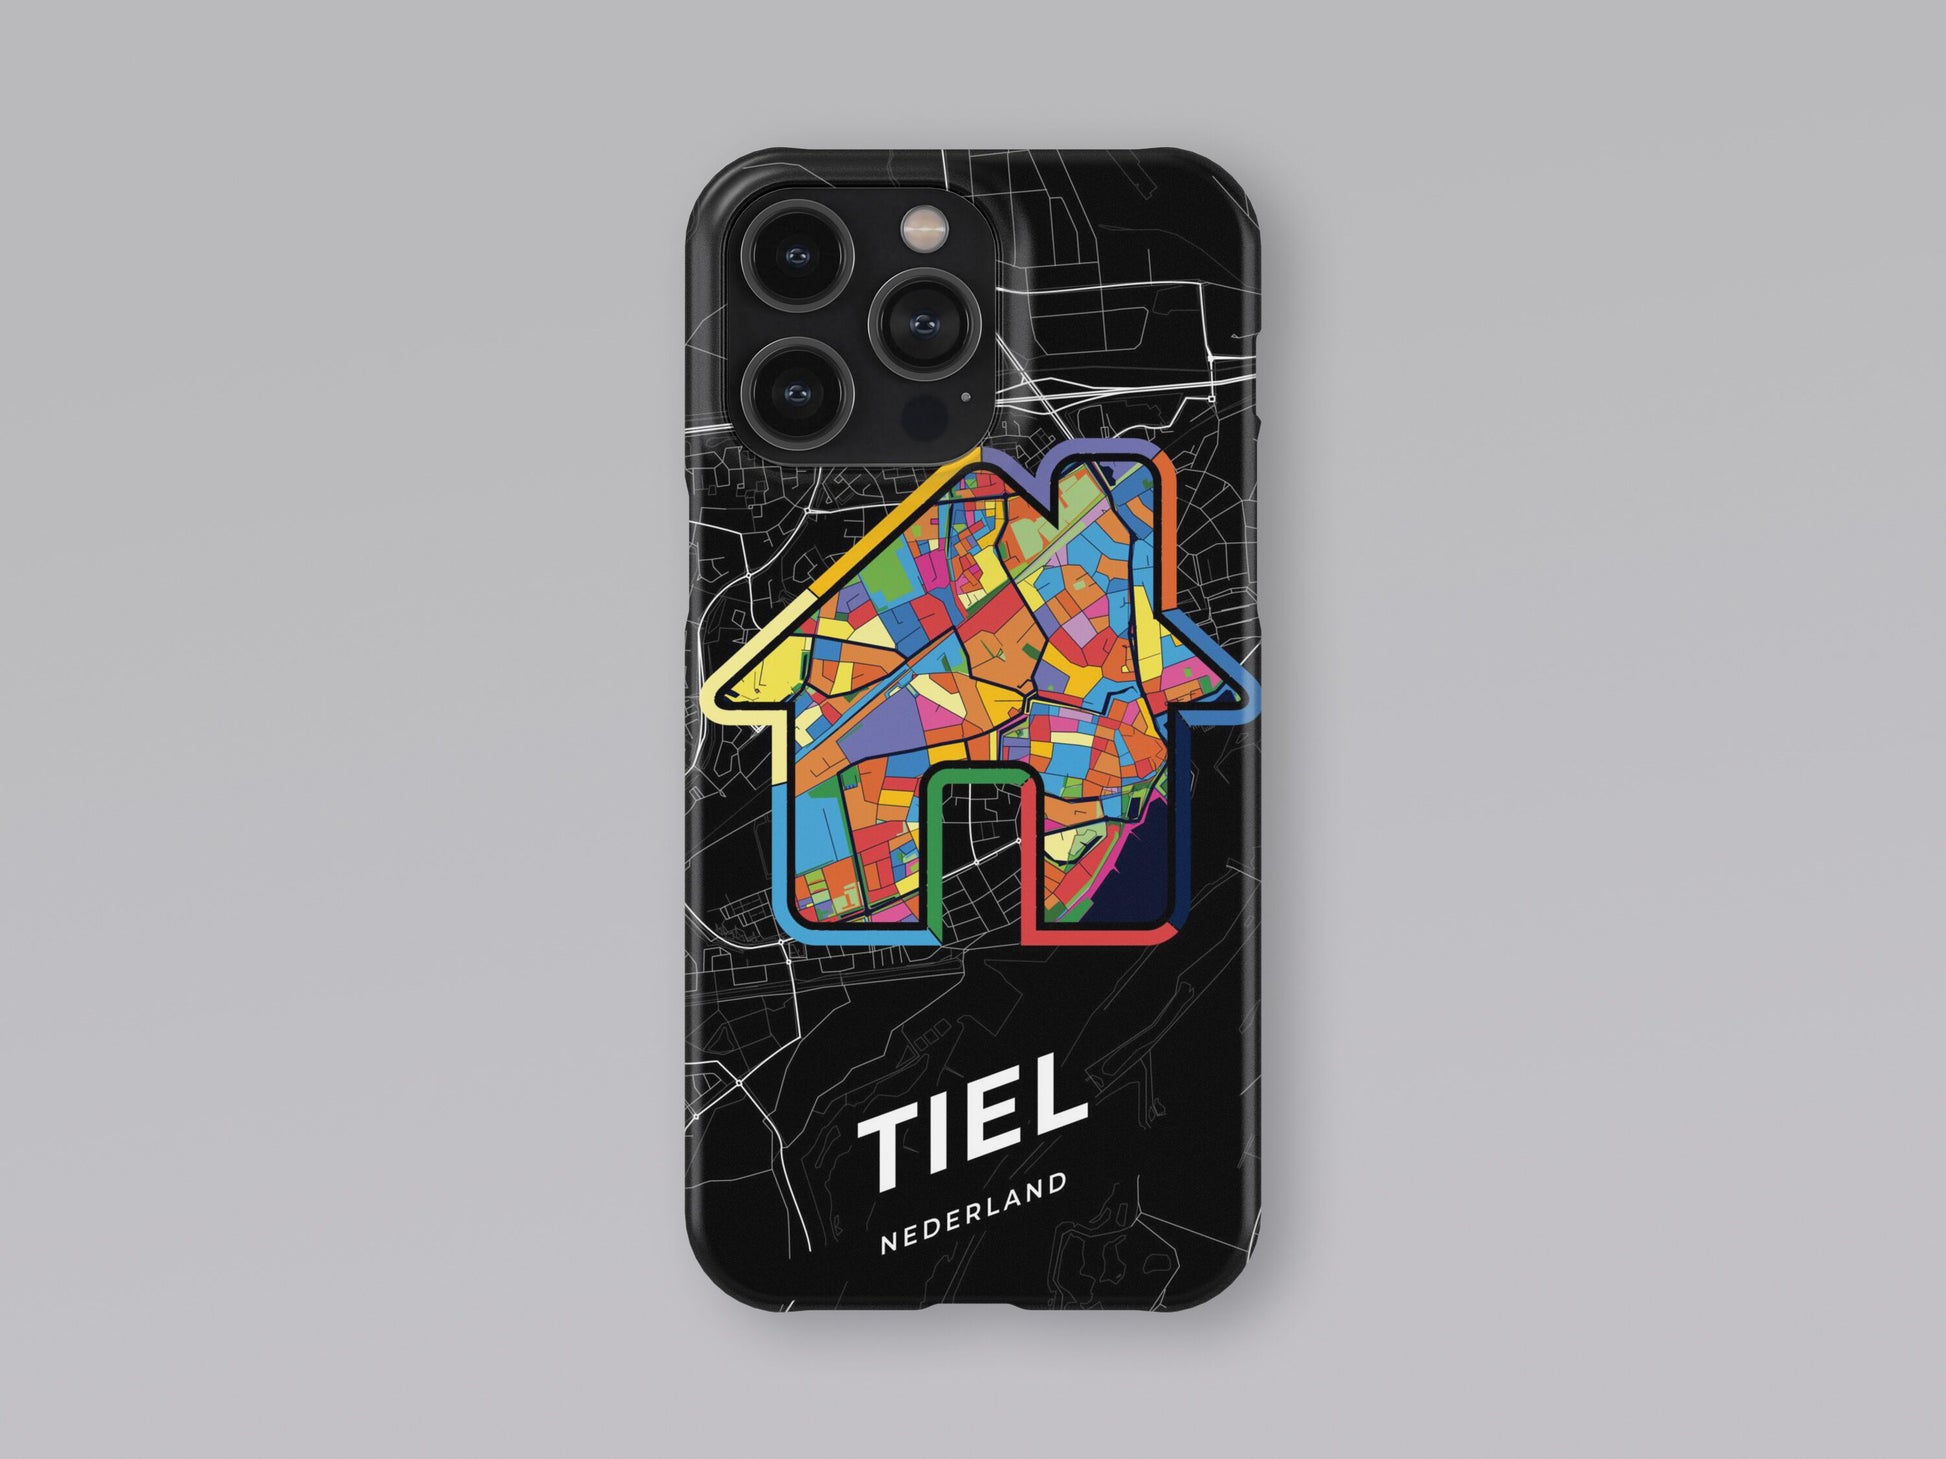 Tiel Netherlands slim phone case with colorful icon 3